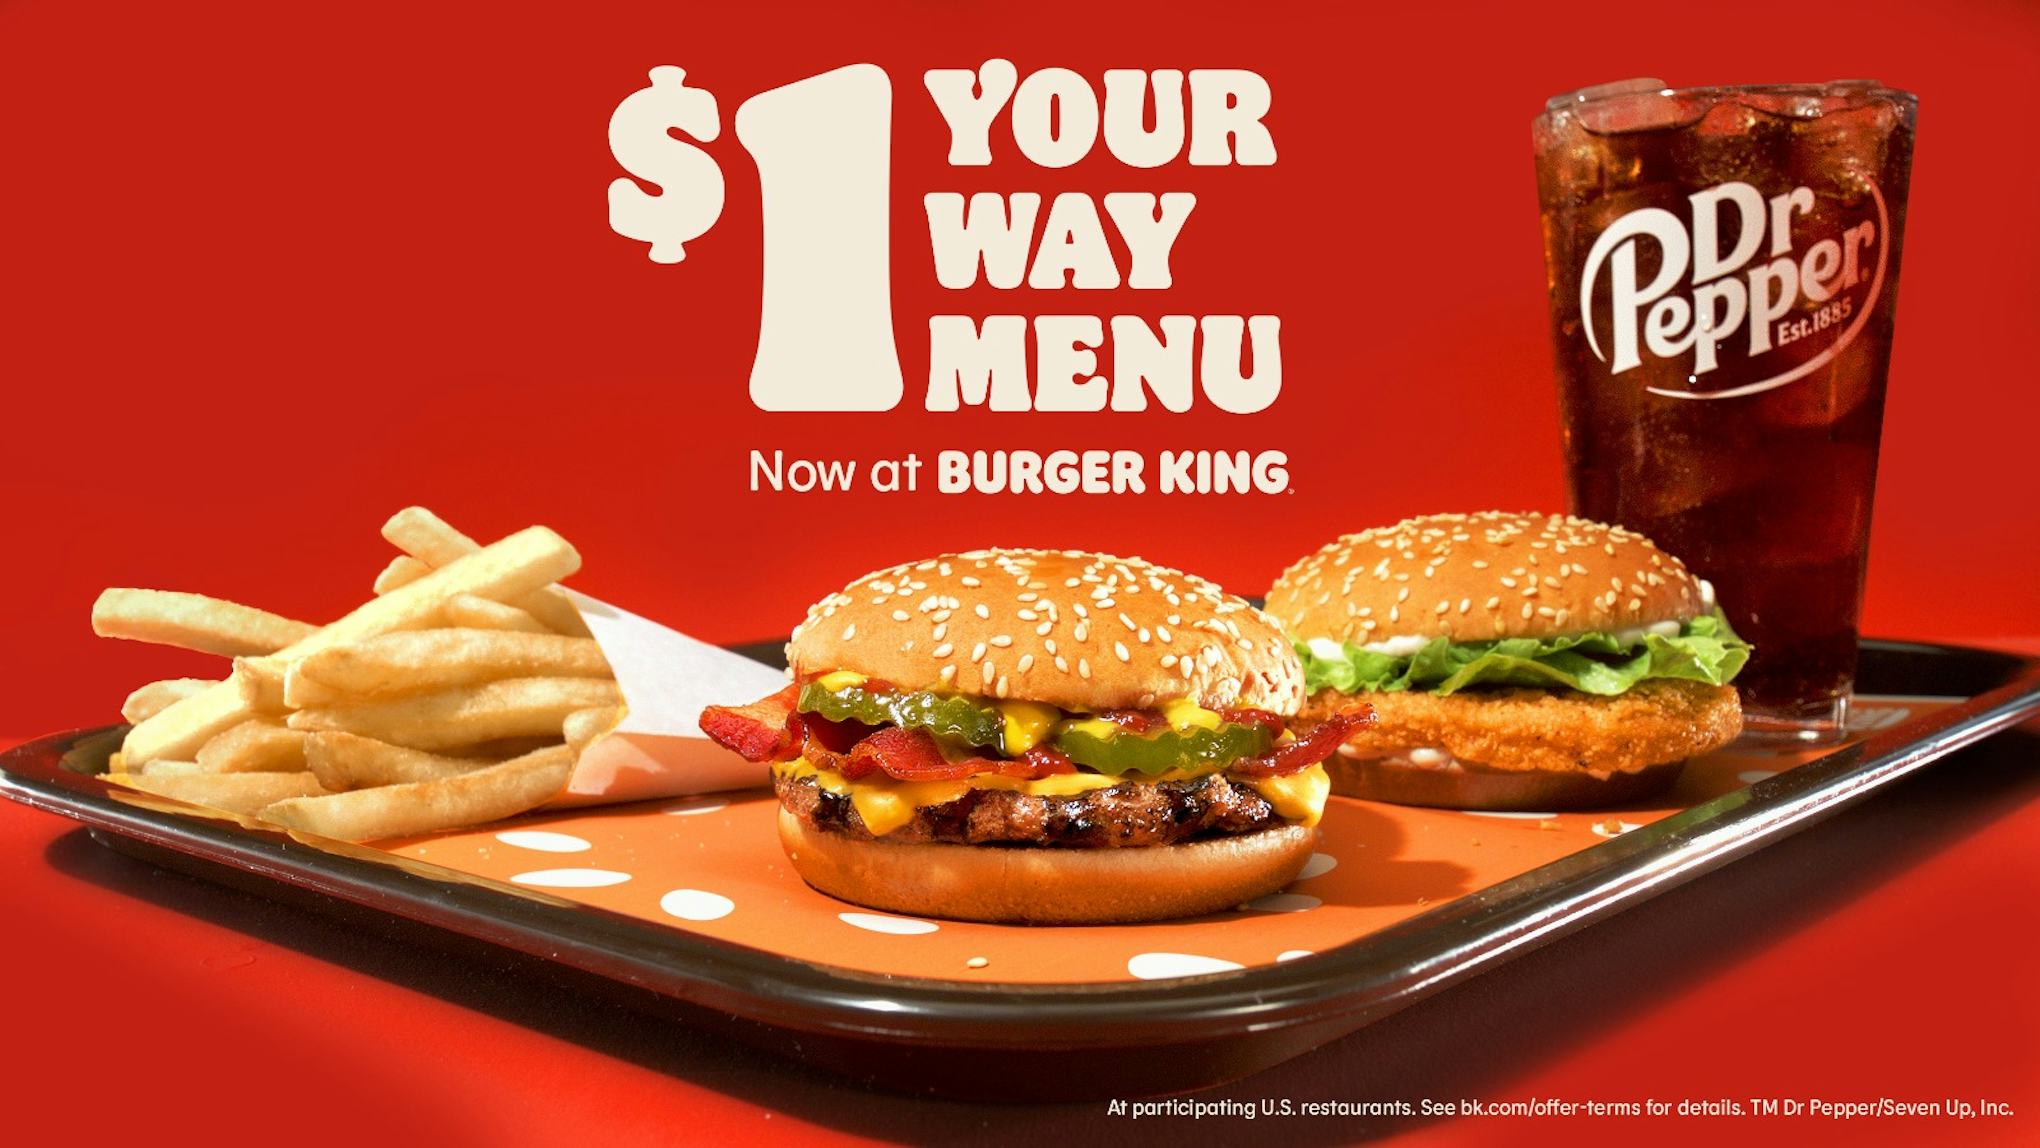 Burger Kings New 1 Your Way Menu For 2021 Is Launching With A Tasty Promo